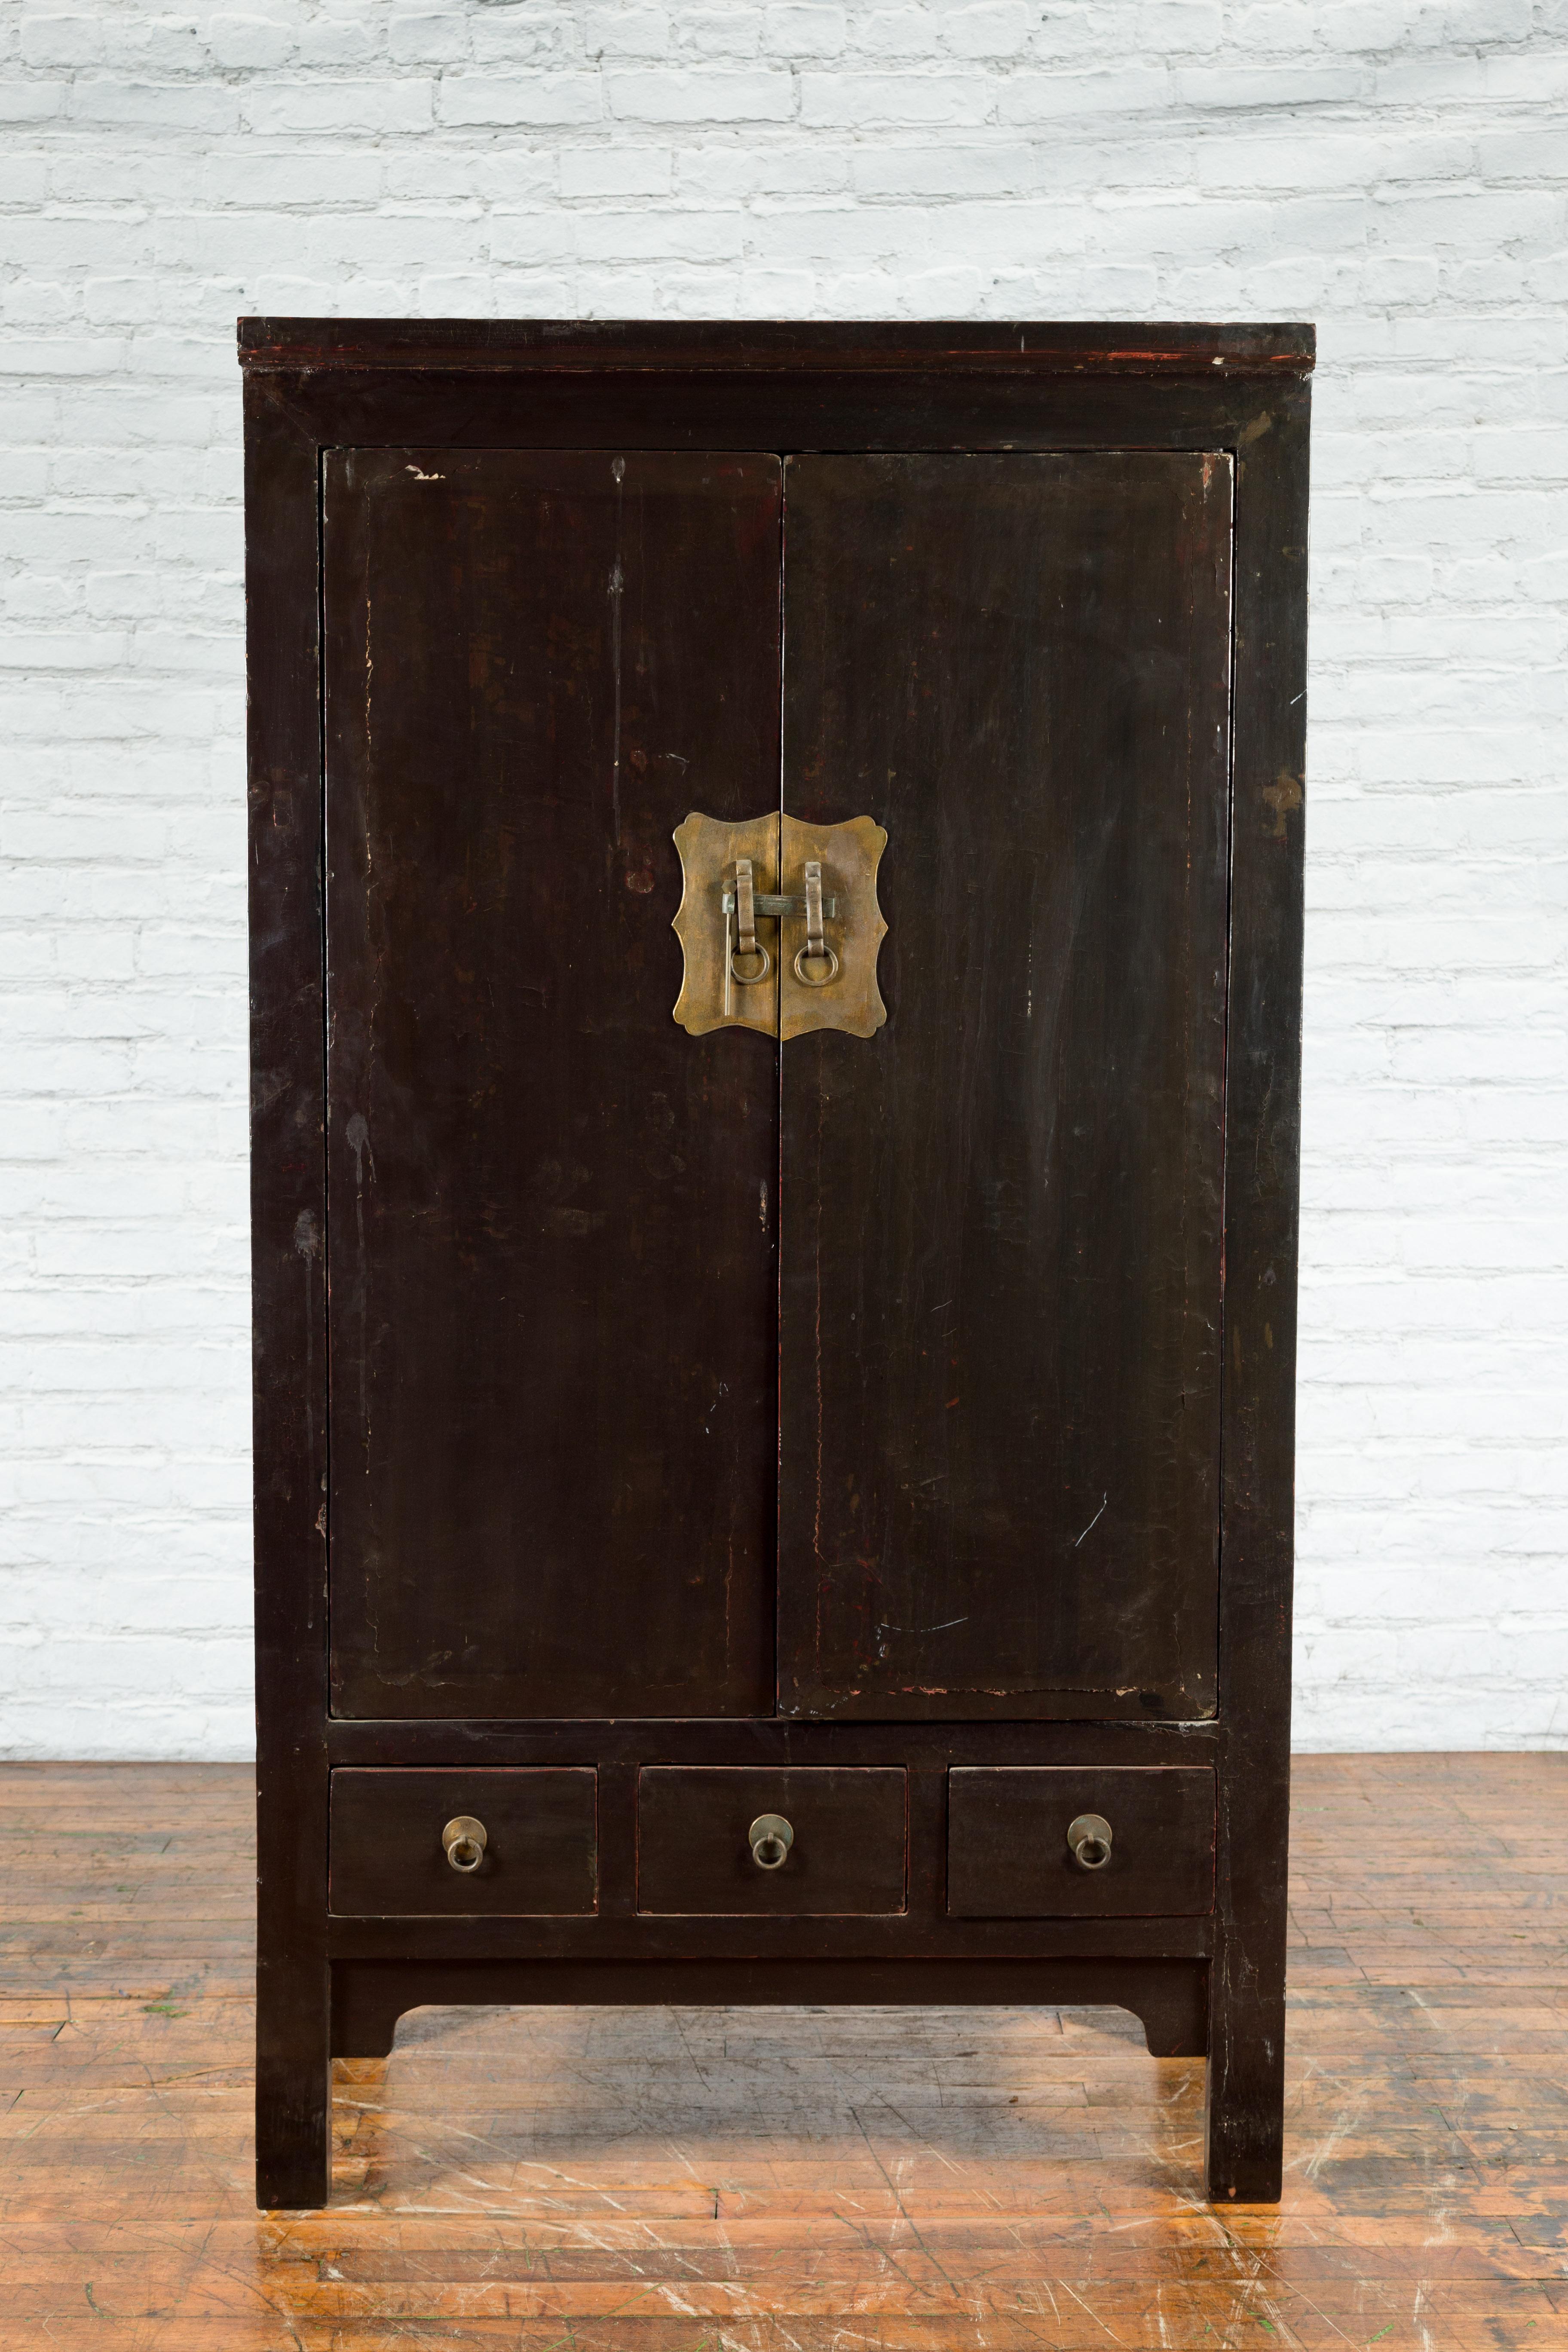 Chinese Qing Dynasty Period Early 19th Century Dark Brown Lacquer Wardrobe In Good Condition For Sale In Yonkers, NY